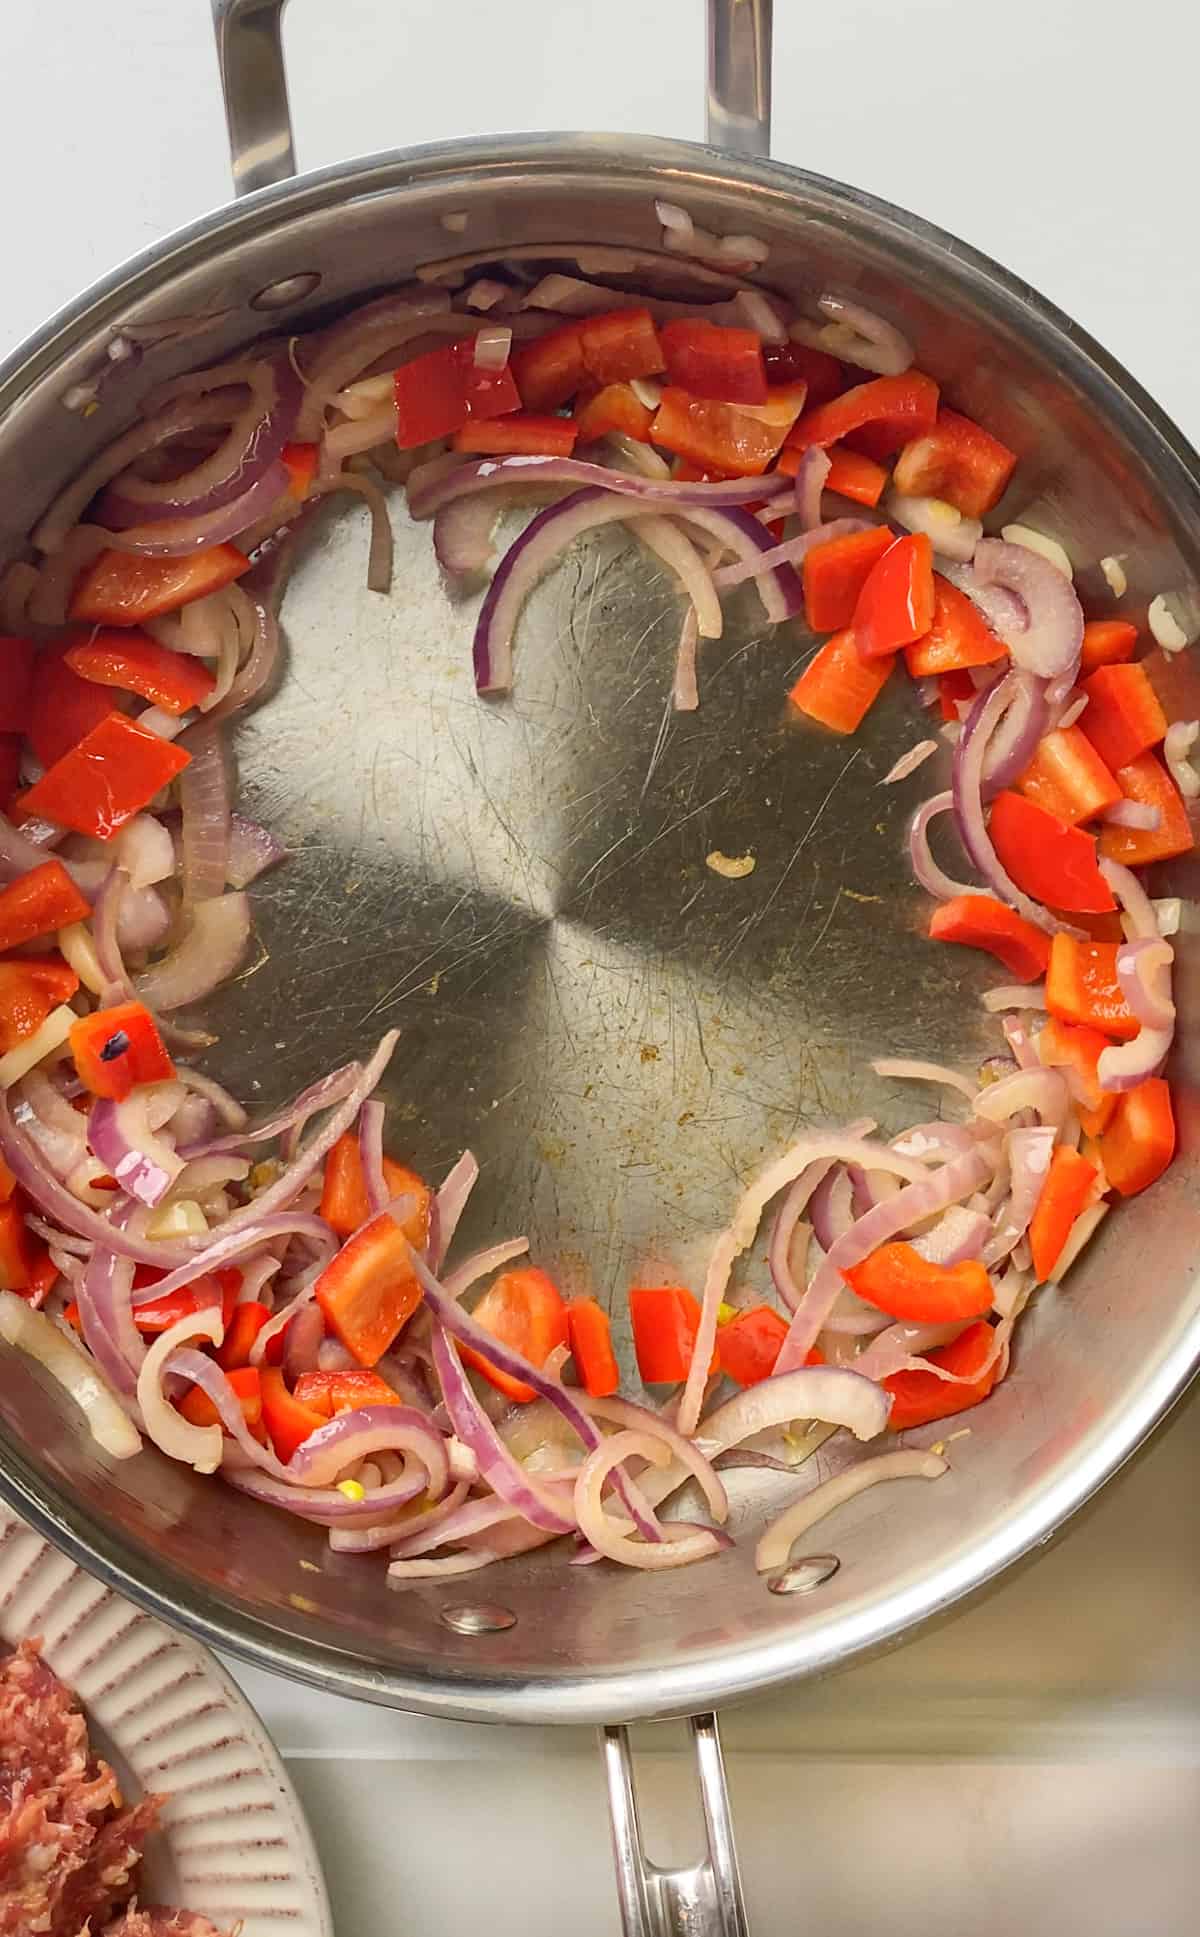 Sautéd red onions, red bell peppers and garlic pushed to the sides of the pan, making a well in the center. Sausage on a plate is in the bottom left corner of the image.